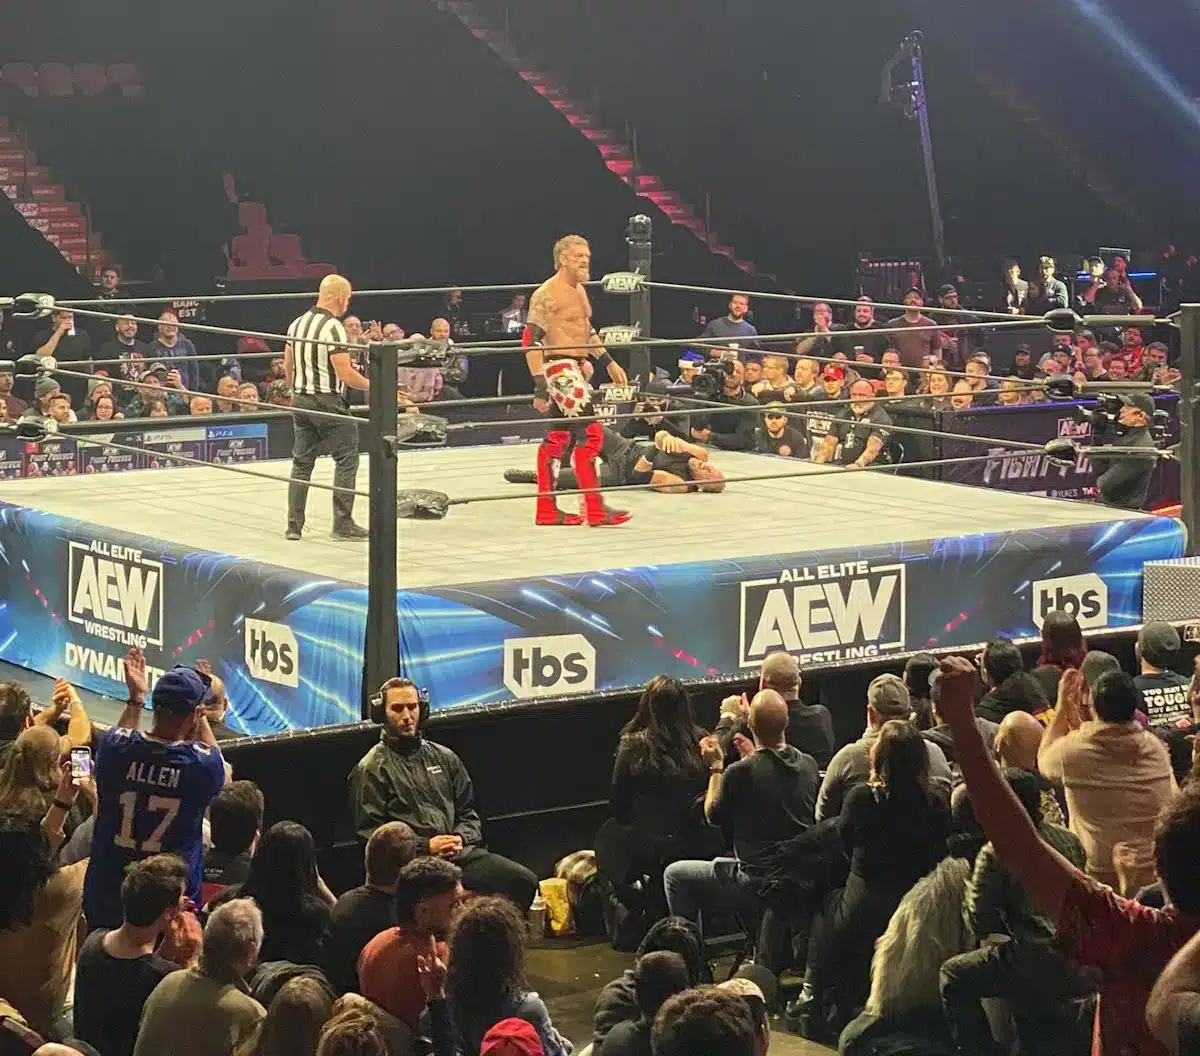 Rated R Superstar vs Christian at our first AEW live experience